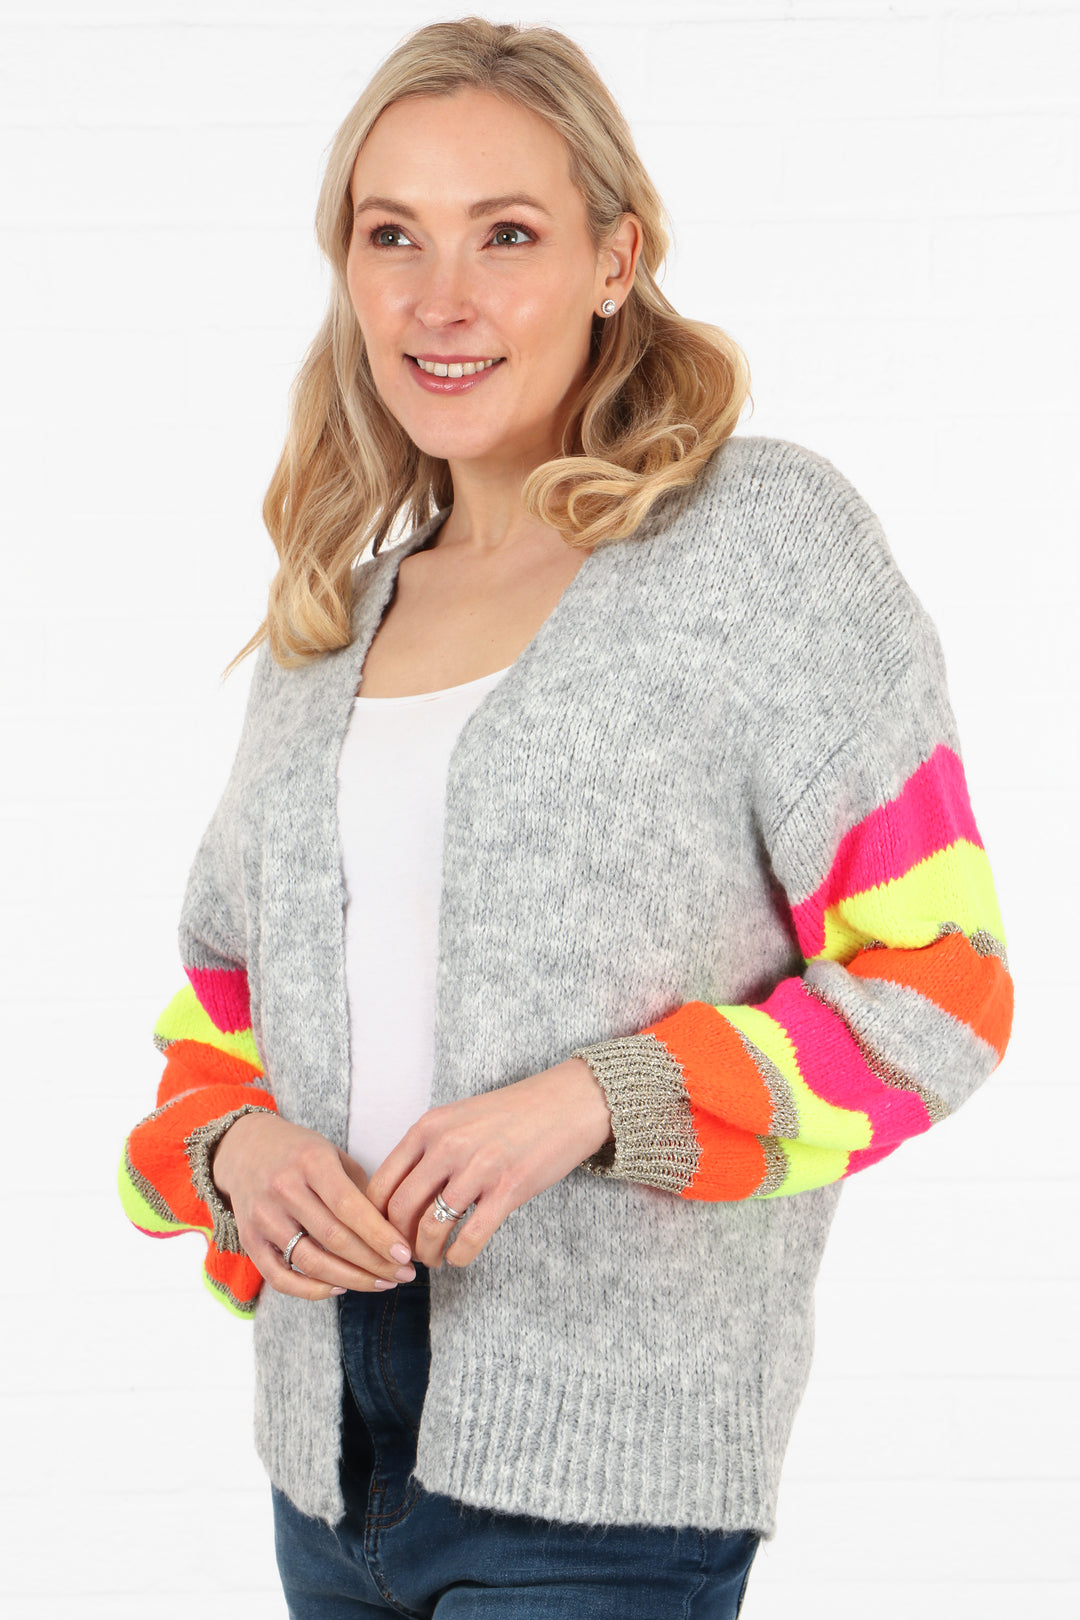 model wearing a light grey open cardigan with colour striped sleeves